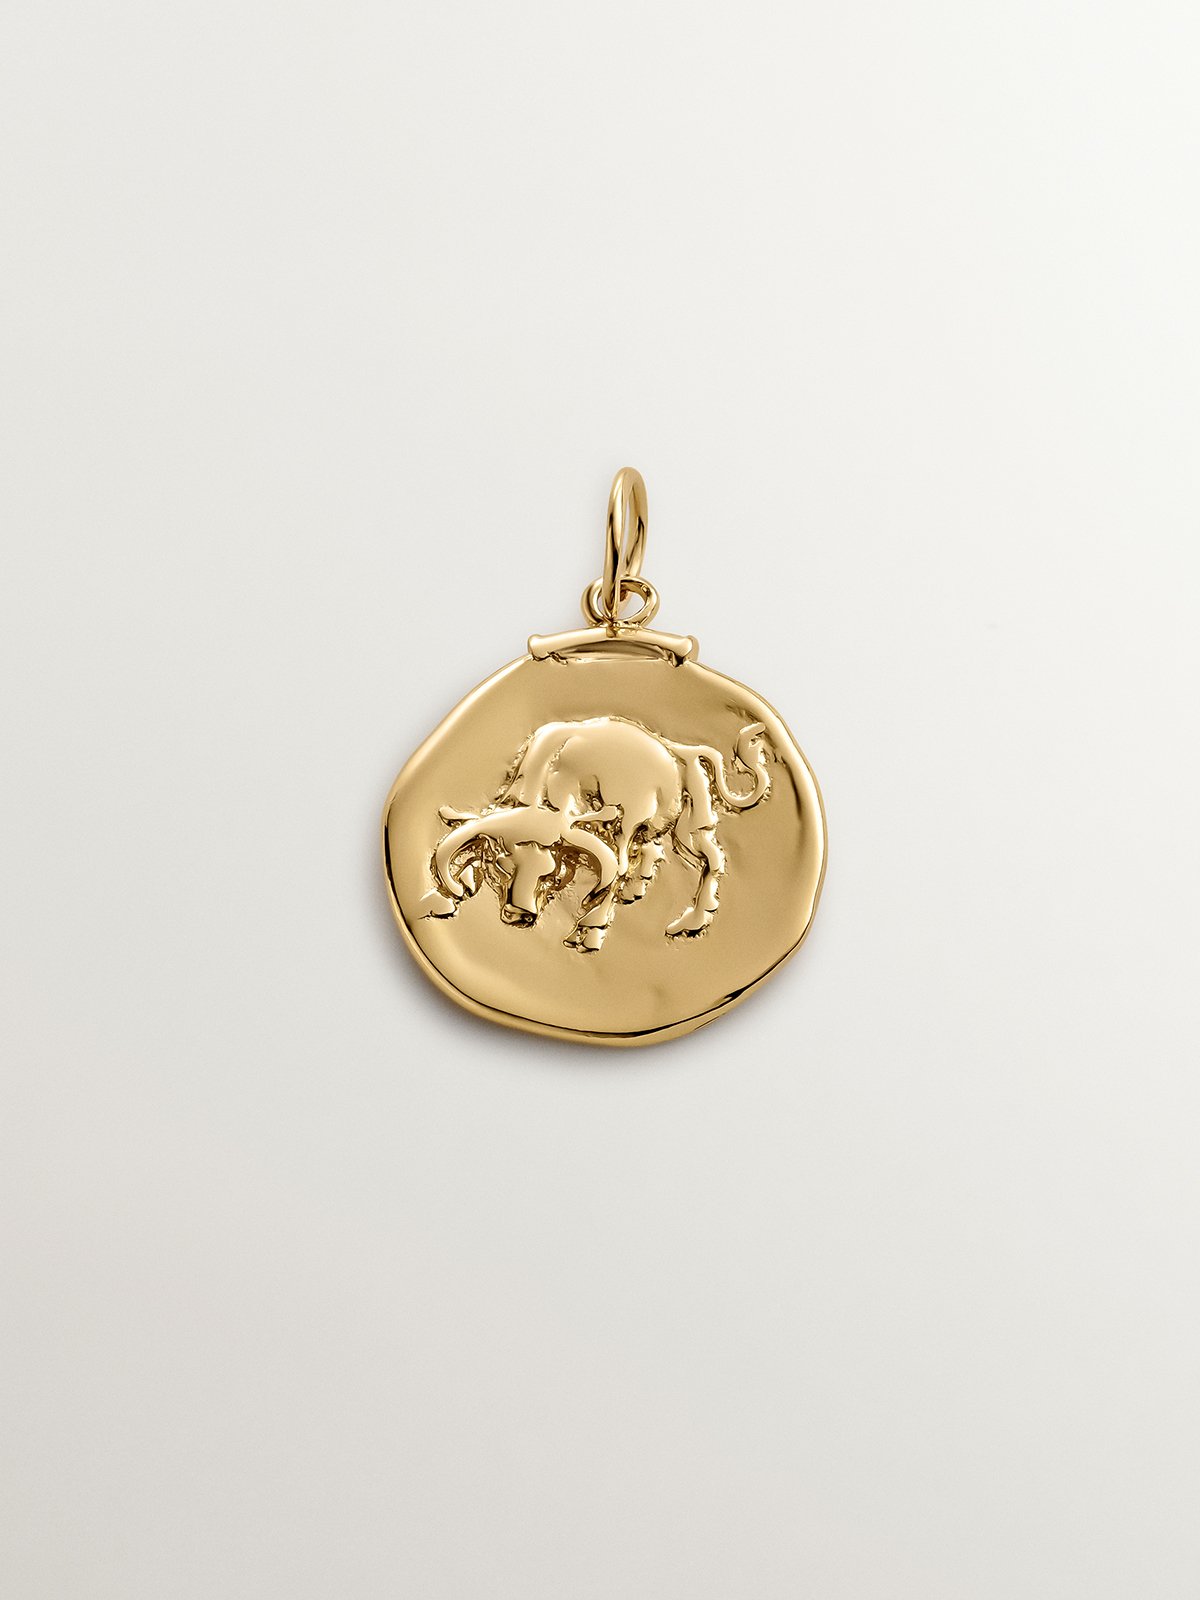 925 Silver Taurus Charm bathed in 18K yellow gold.